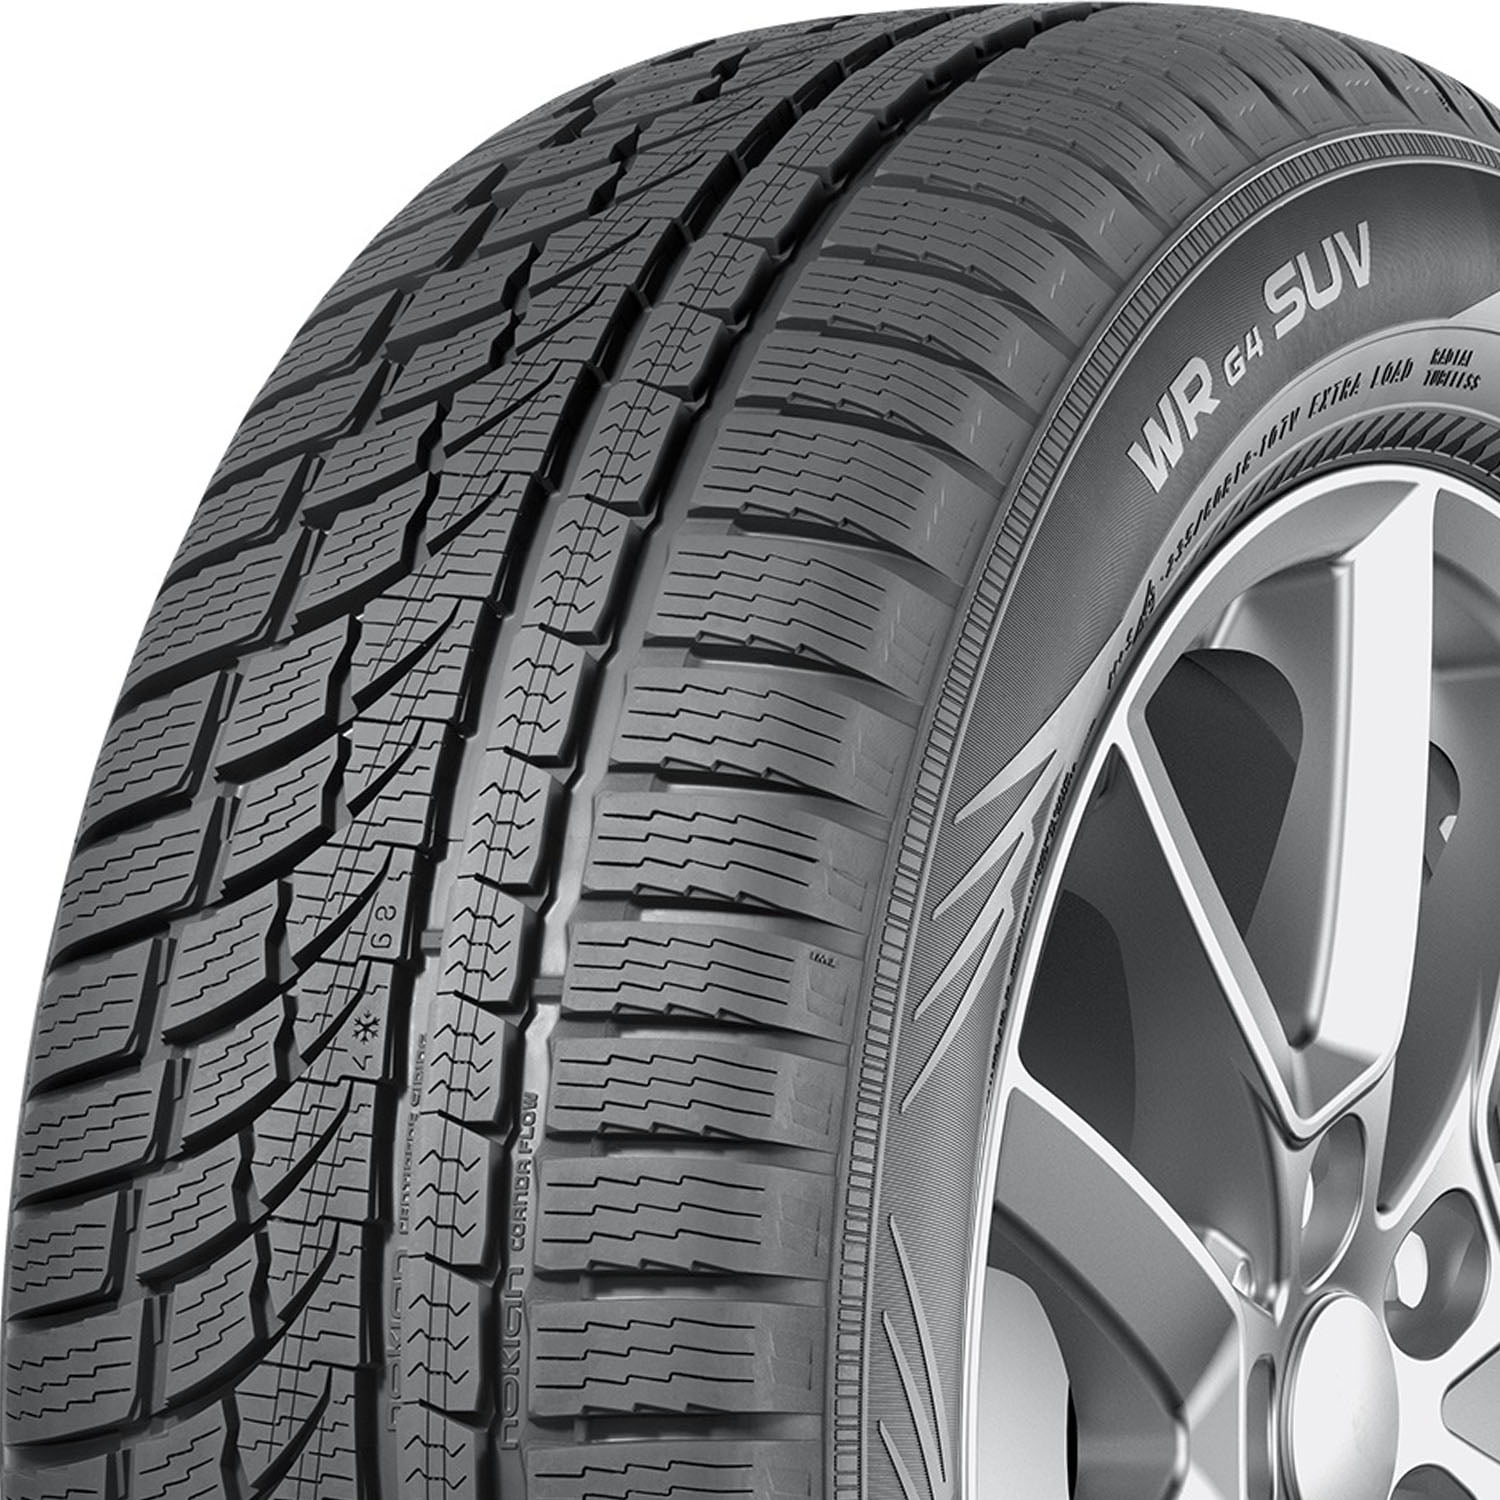 Nokian WR G4 SUV All Weather 235/65R18 106V SUV/Crossover Tire